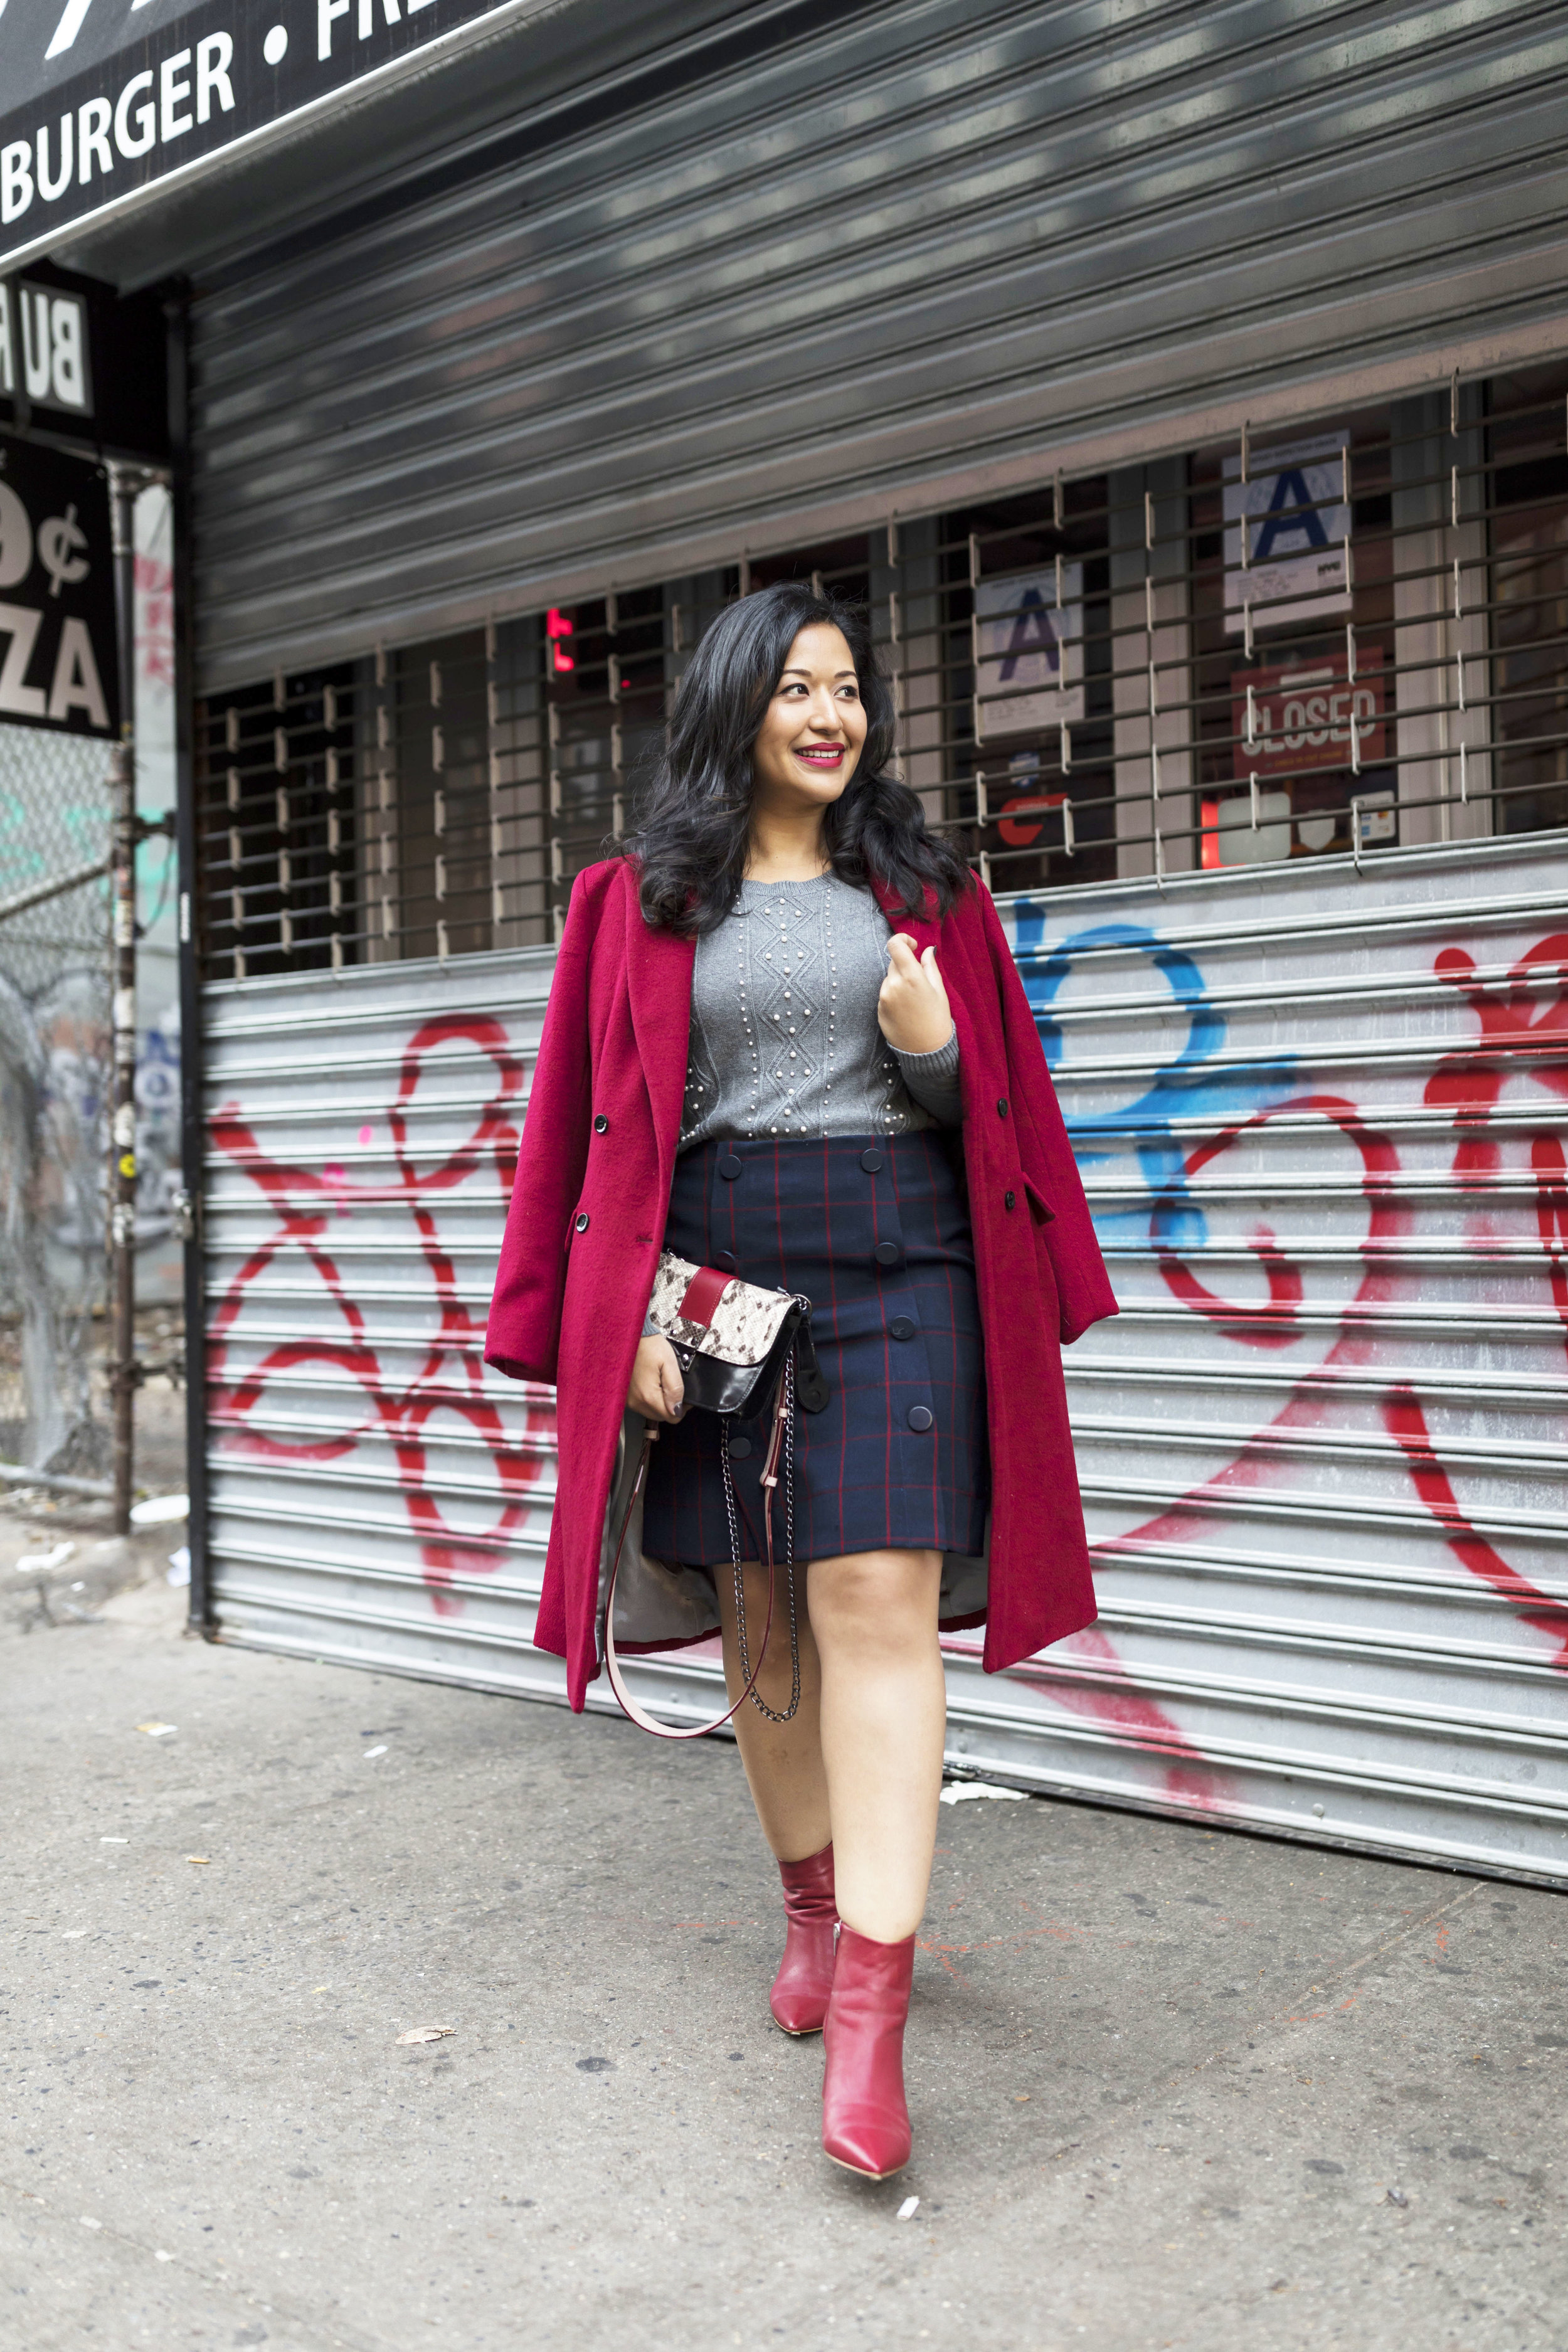 Krity S x Preppy Fall Outfit x Red Coat1.jpg